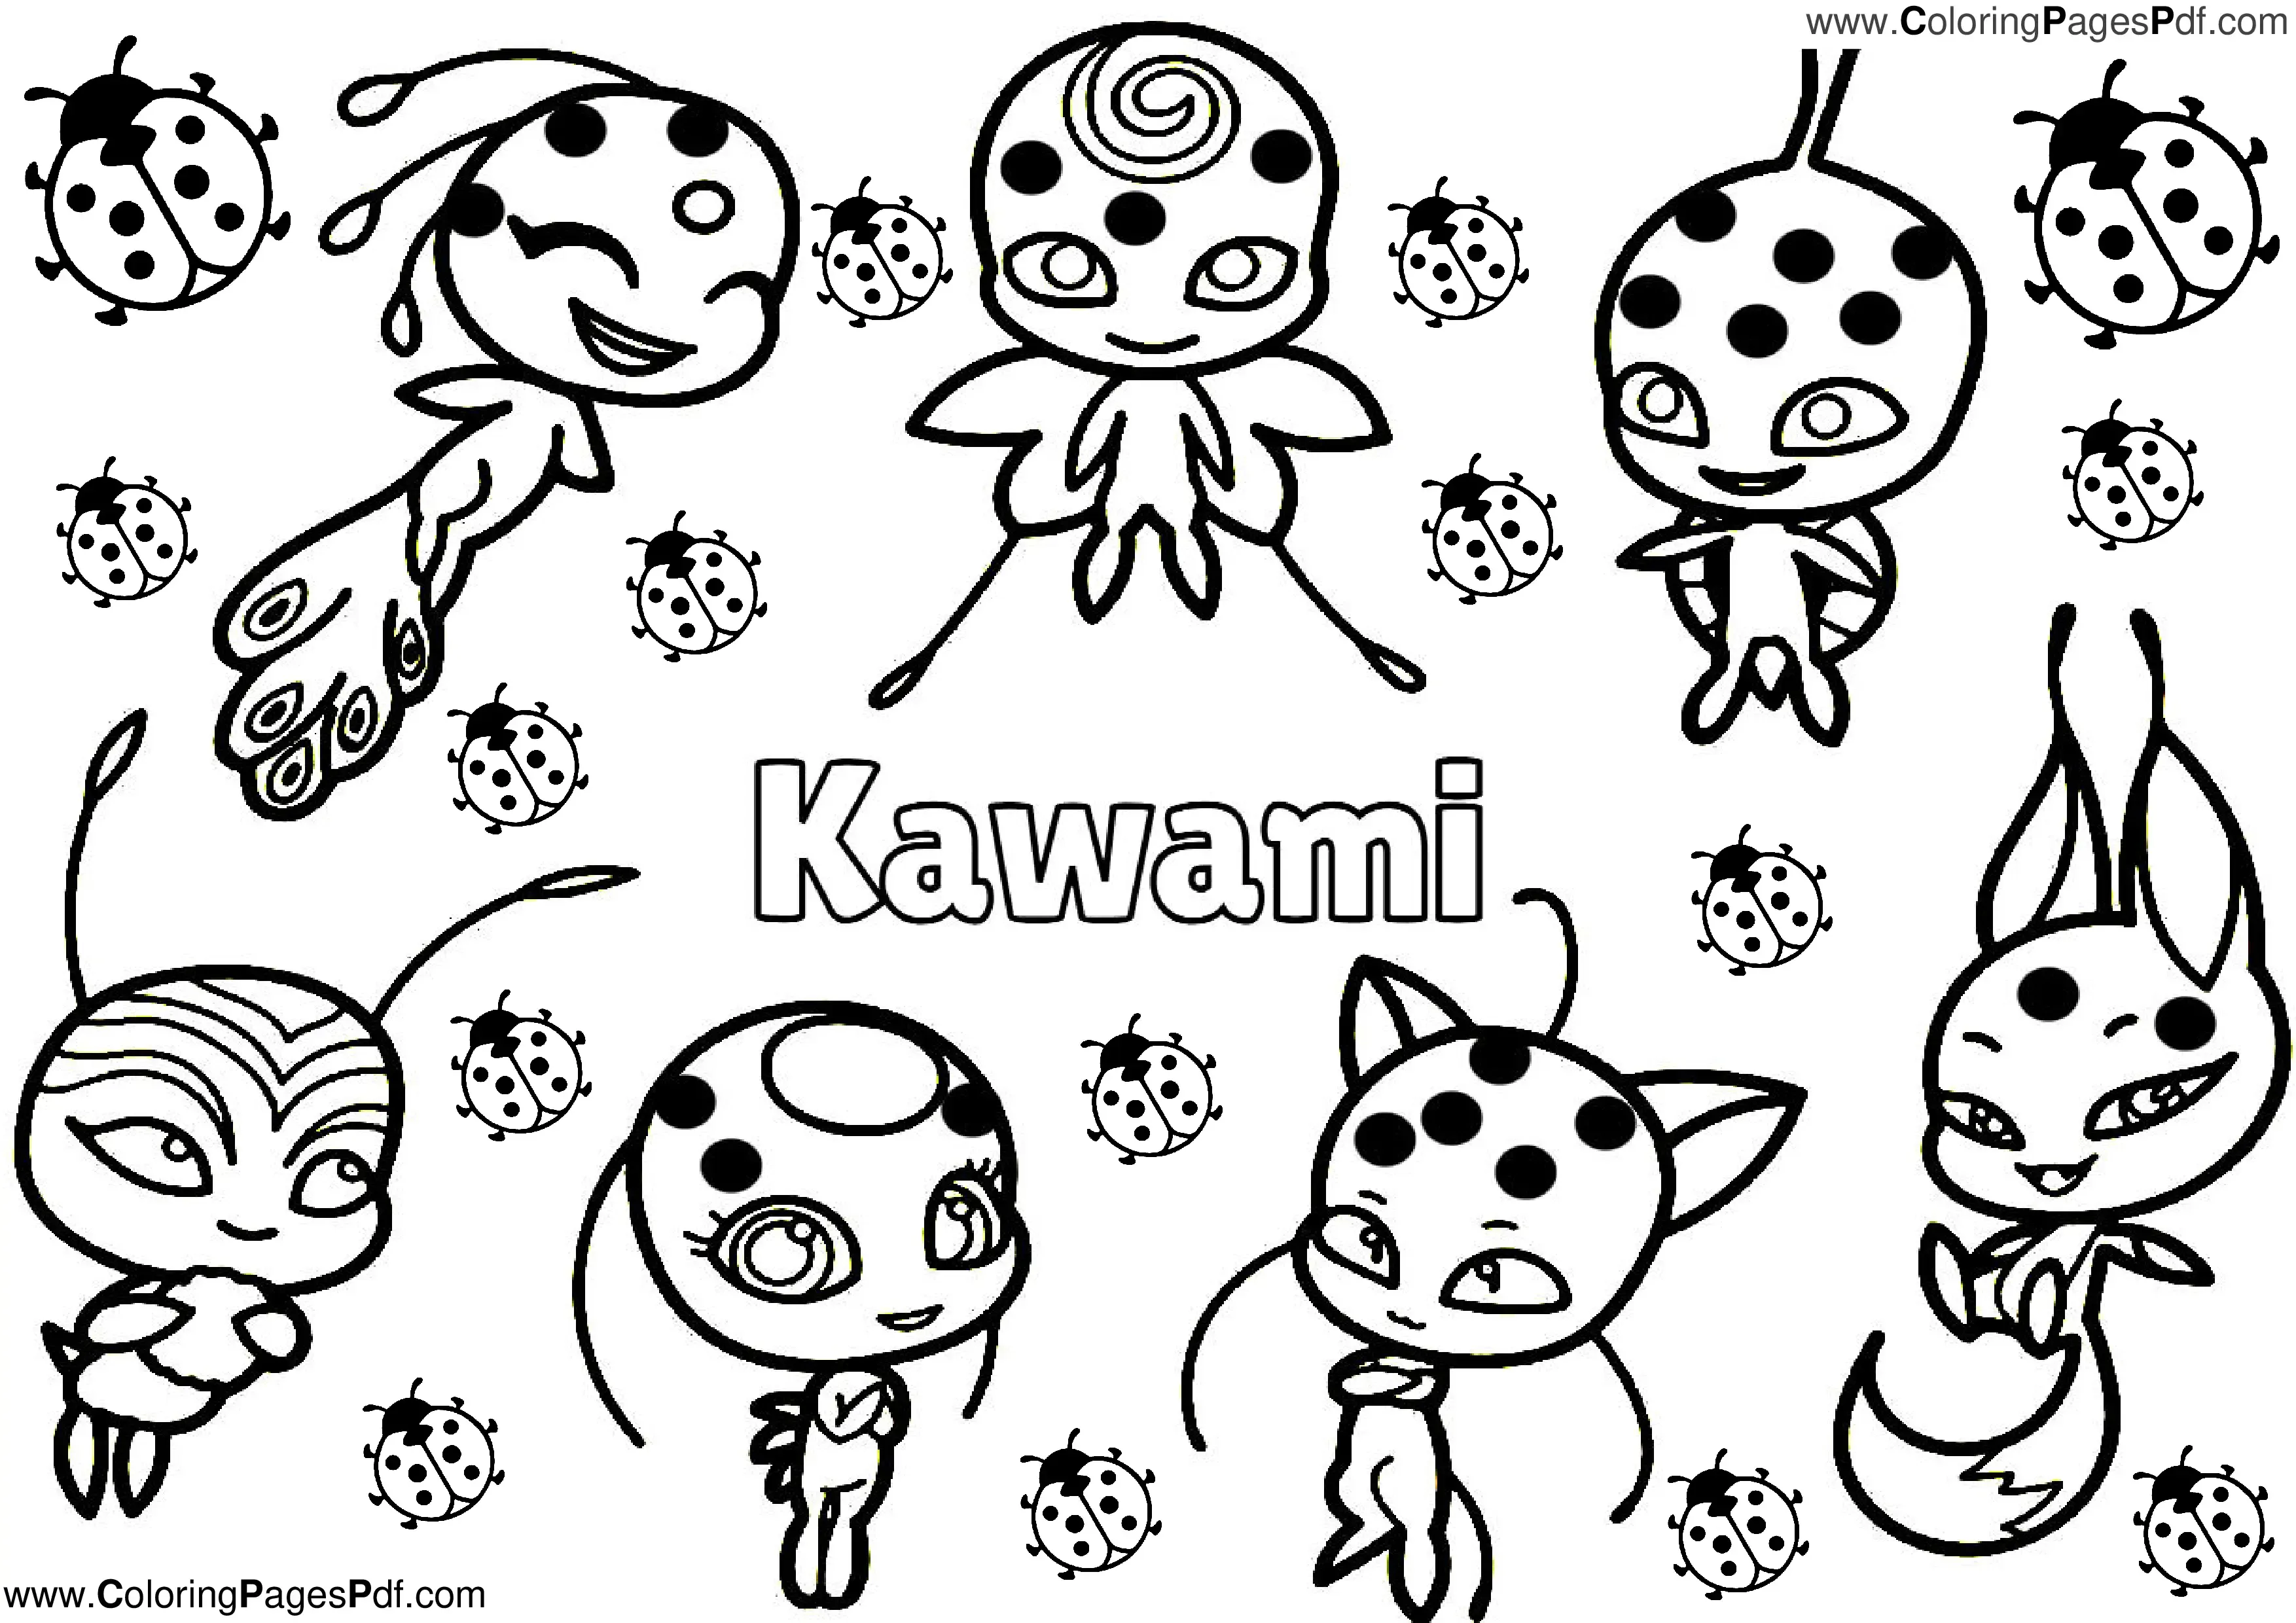 Kwami miraculous ladybug coloring pages